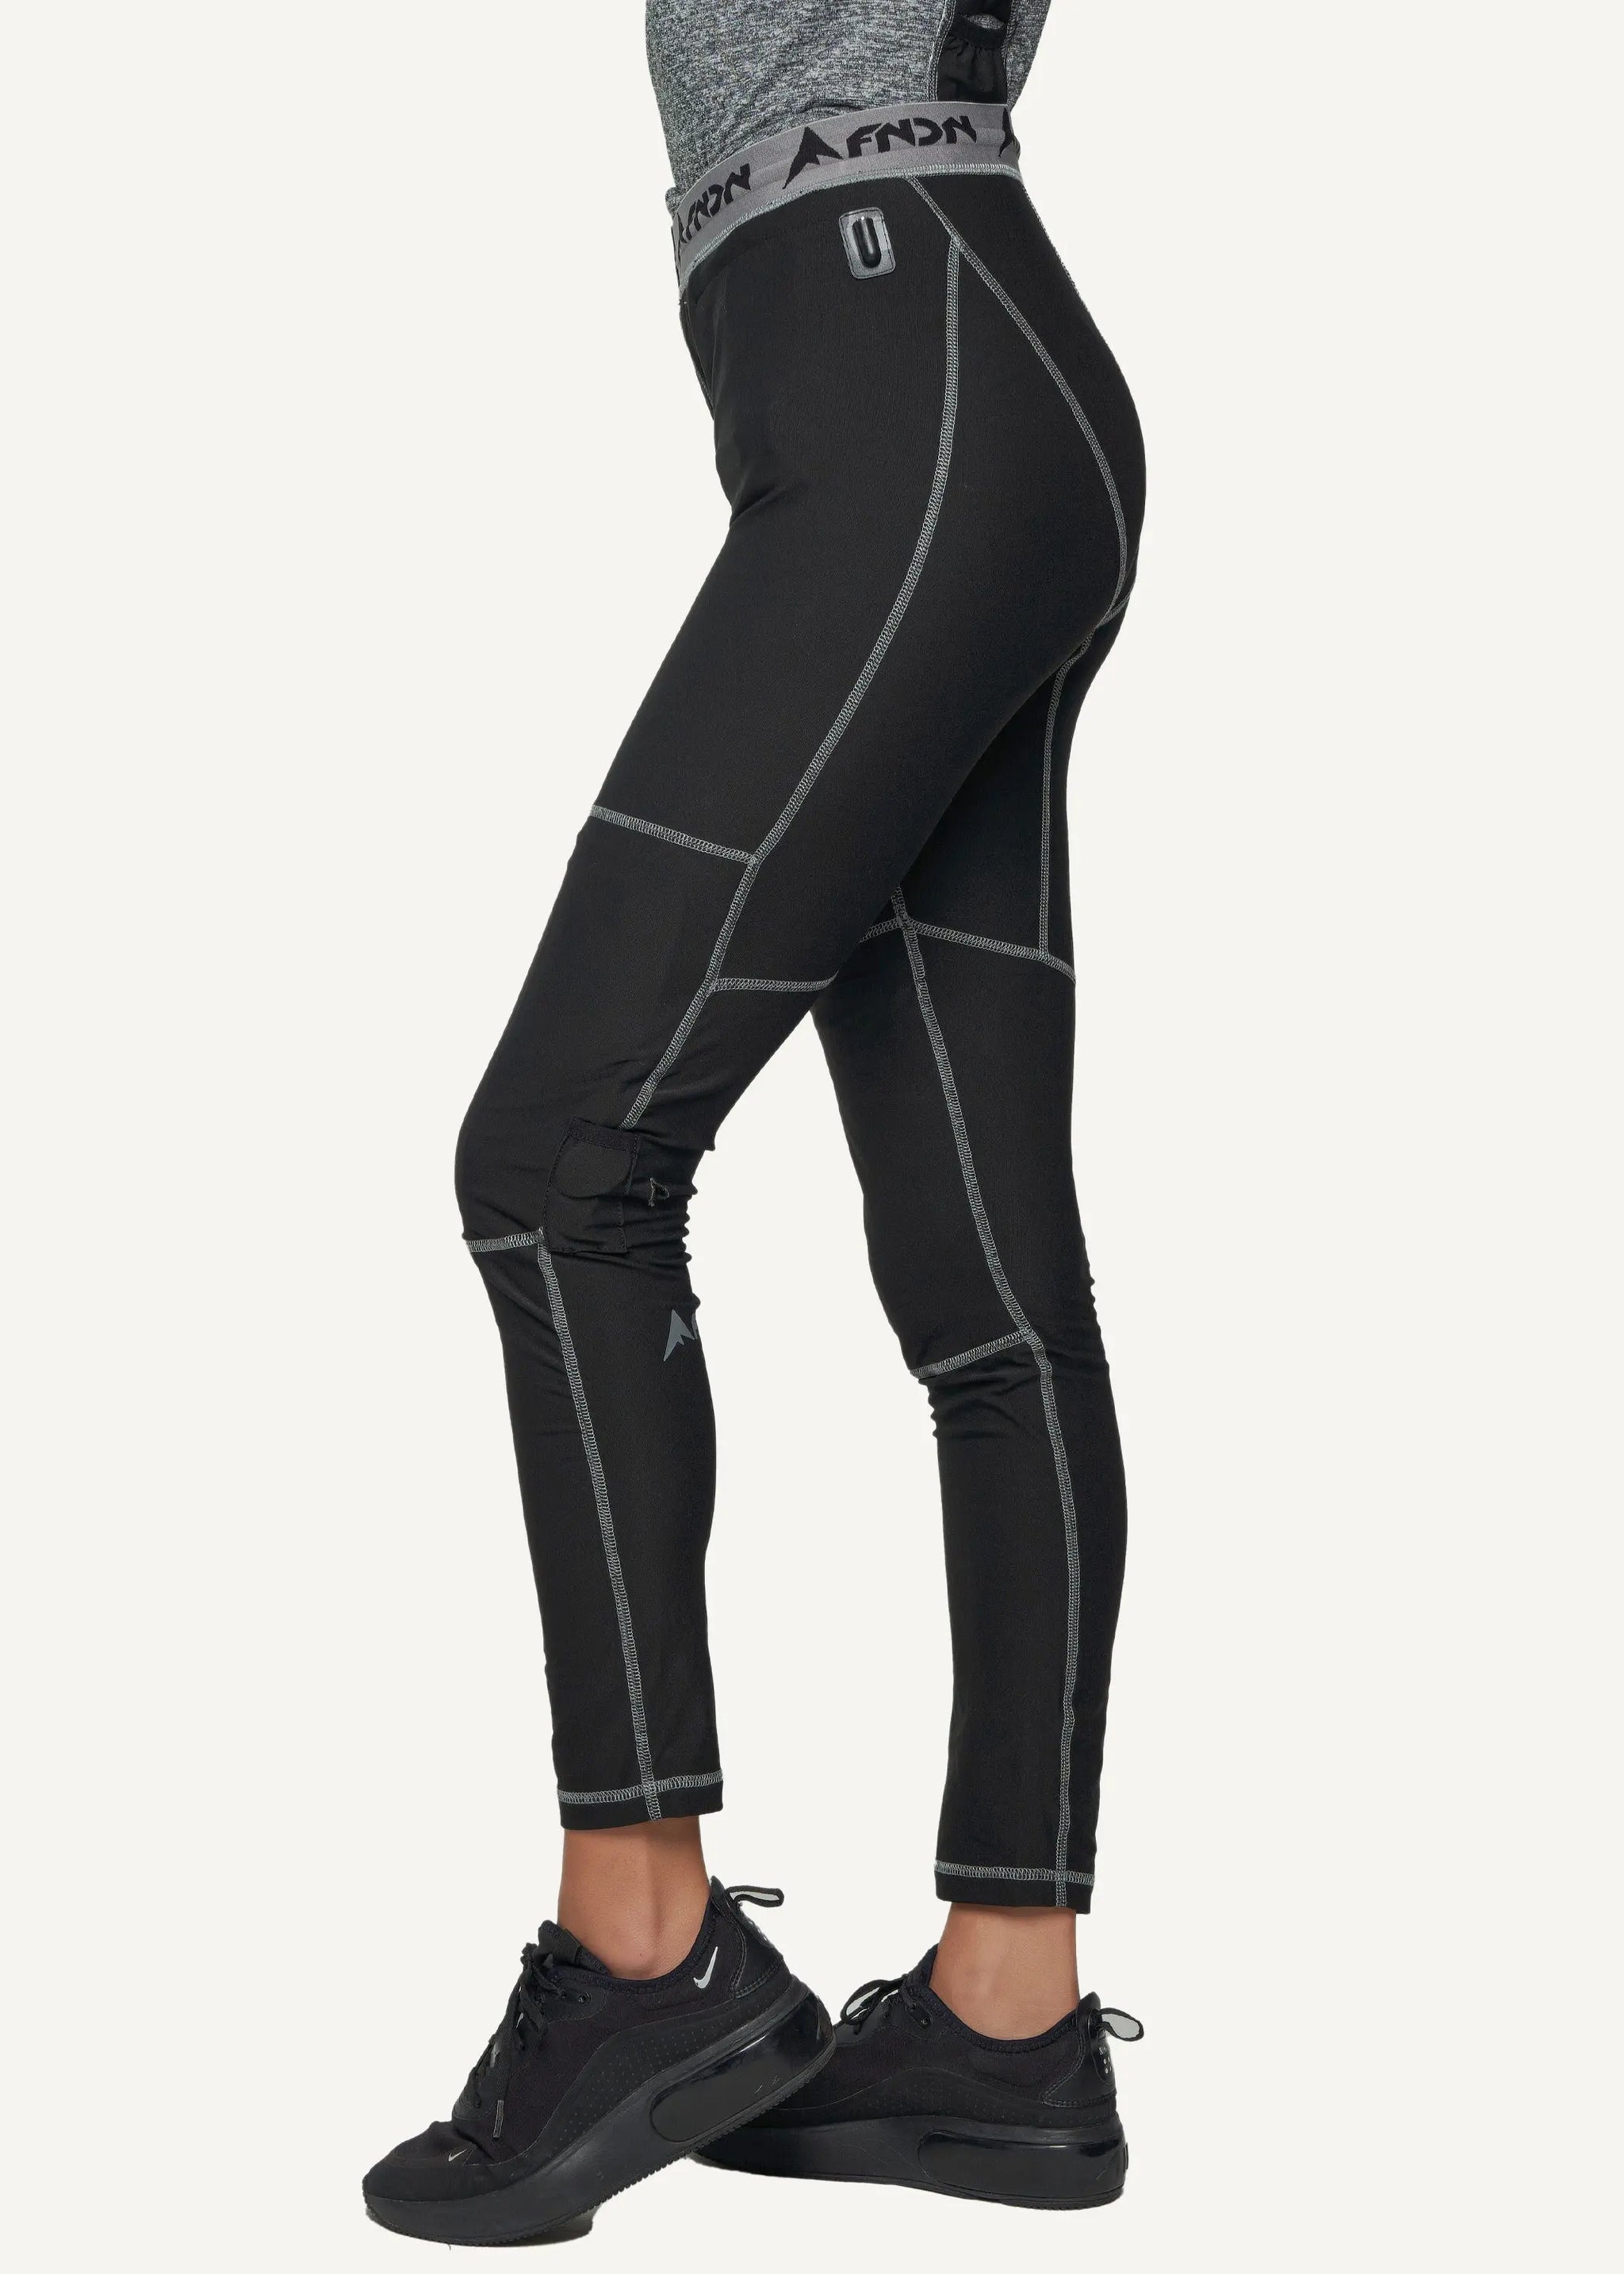 BASE 7/8 Women's Active Tights - Black